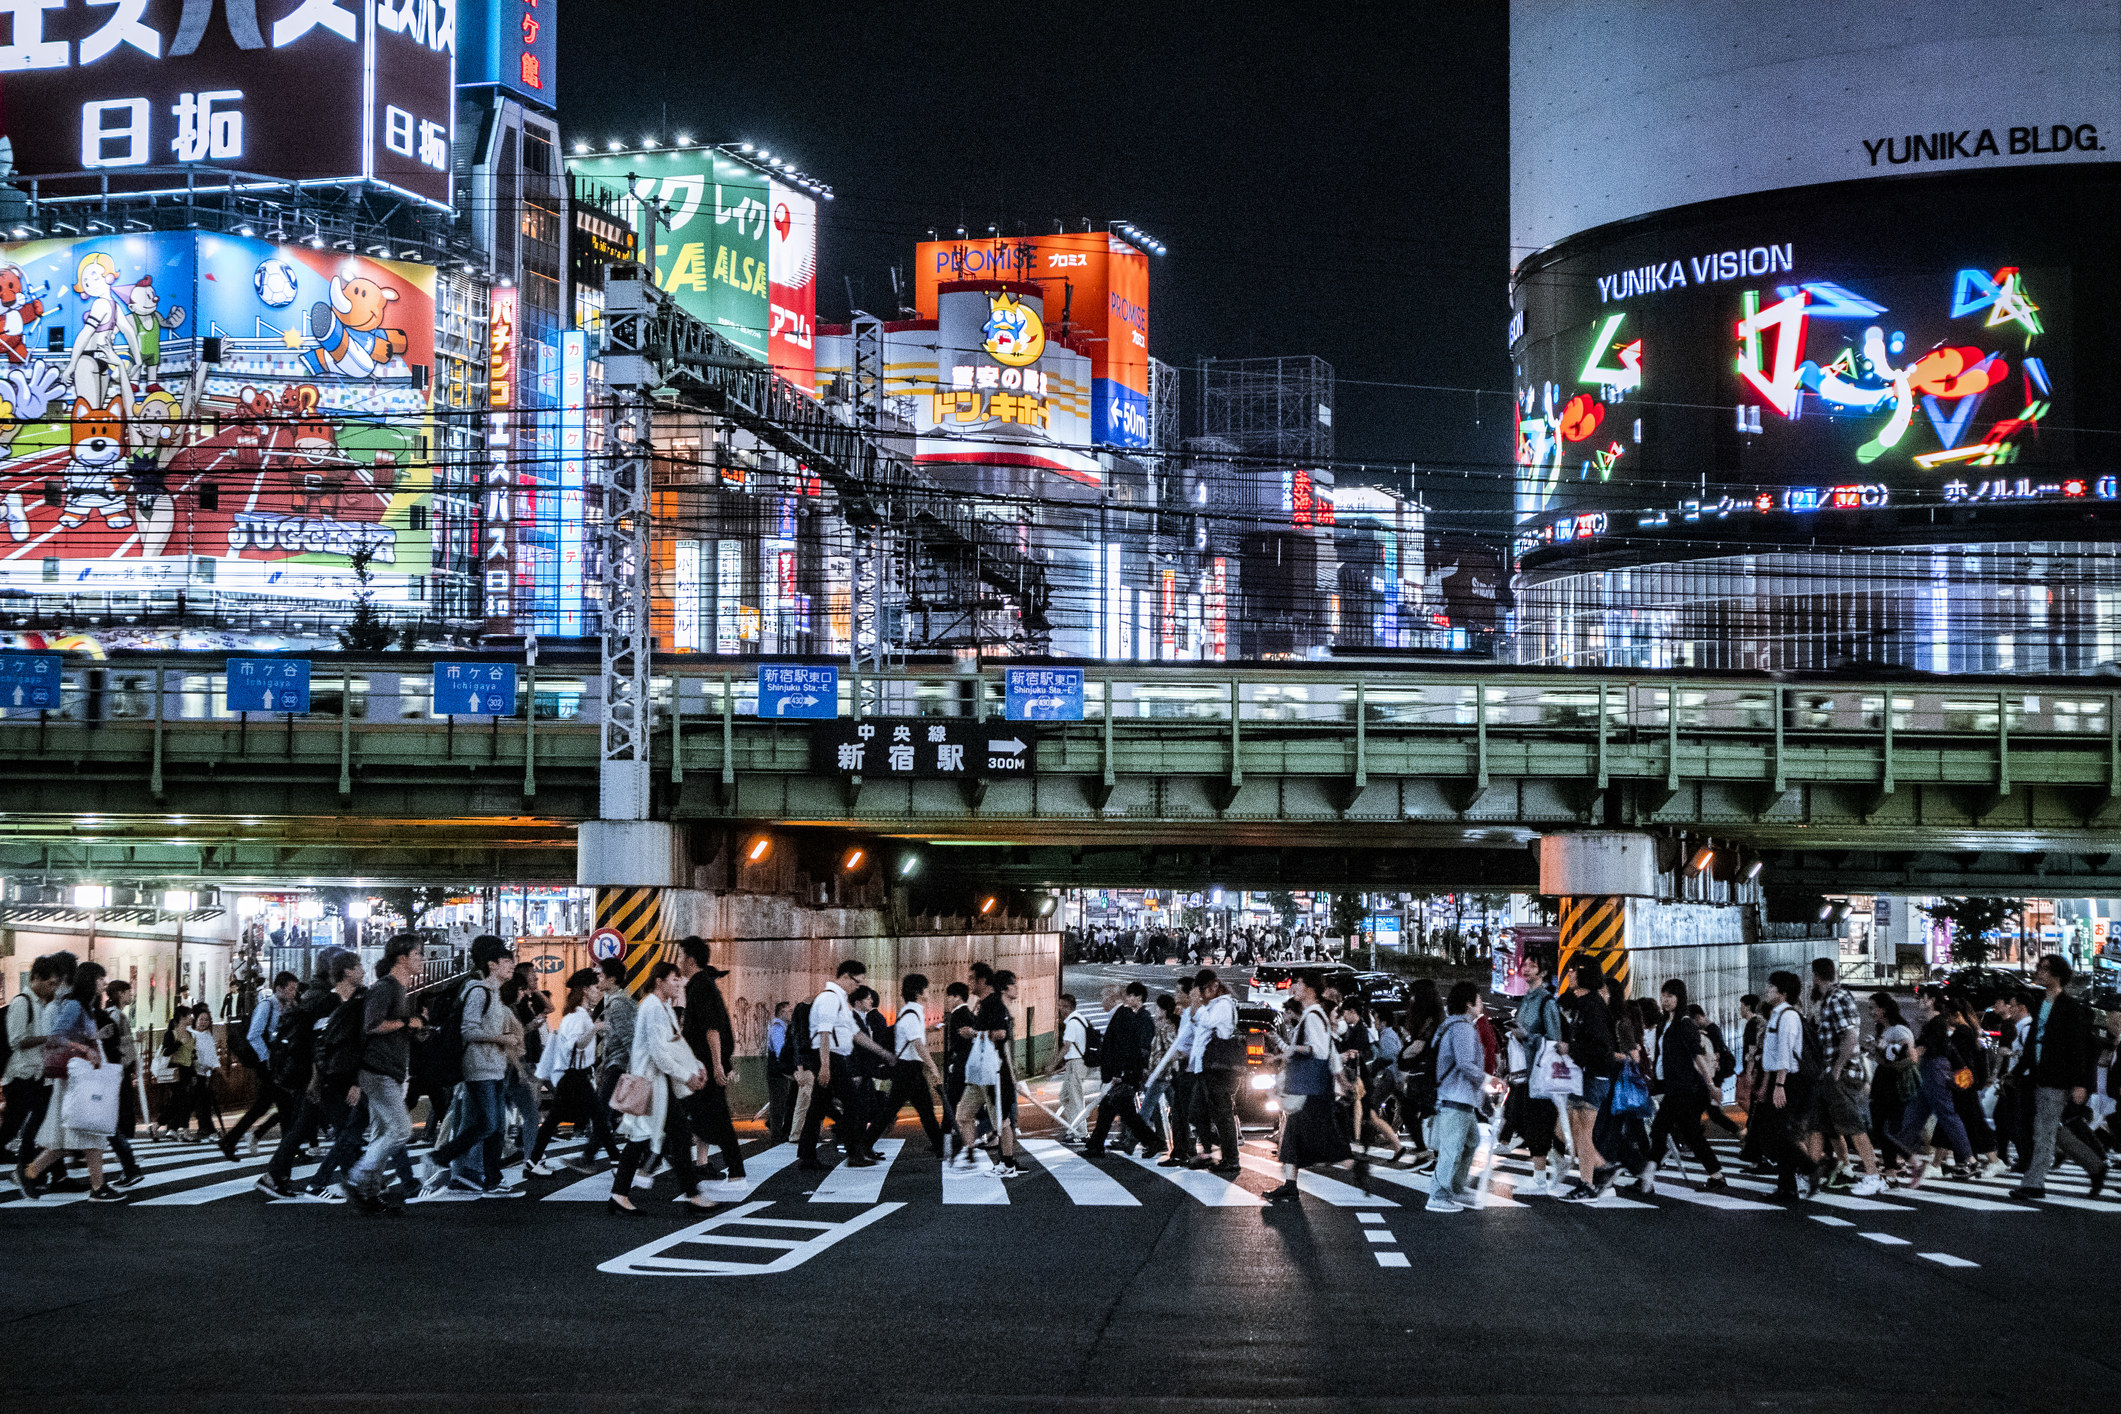 A clean street in Tokyo with lots of neon lights and signs